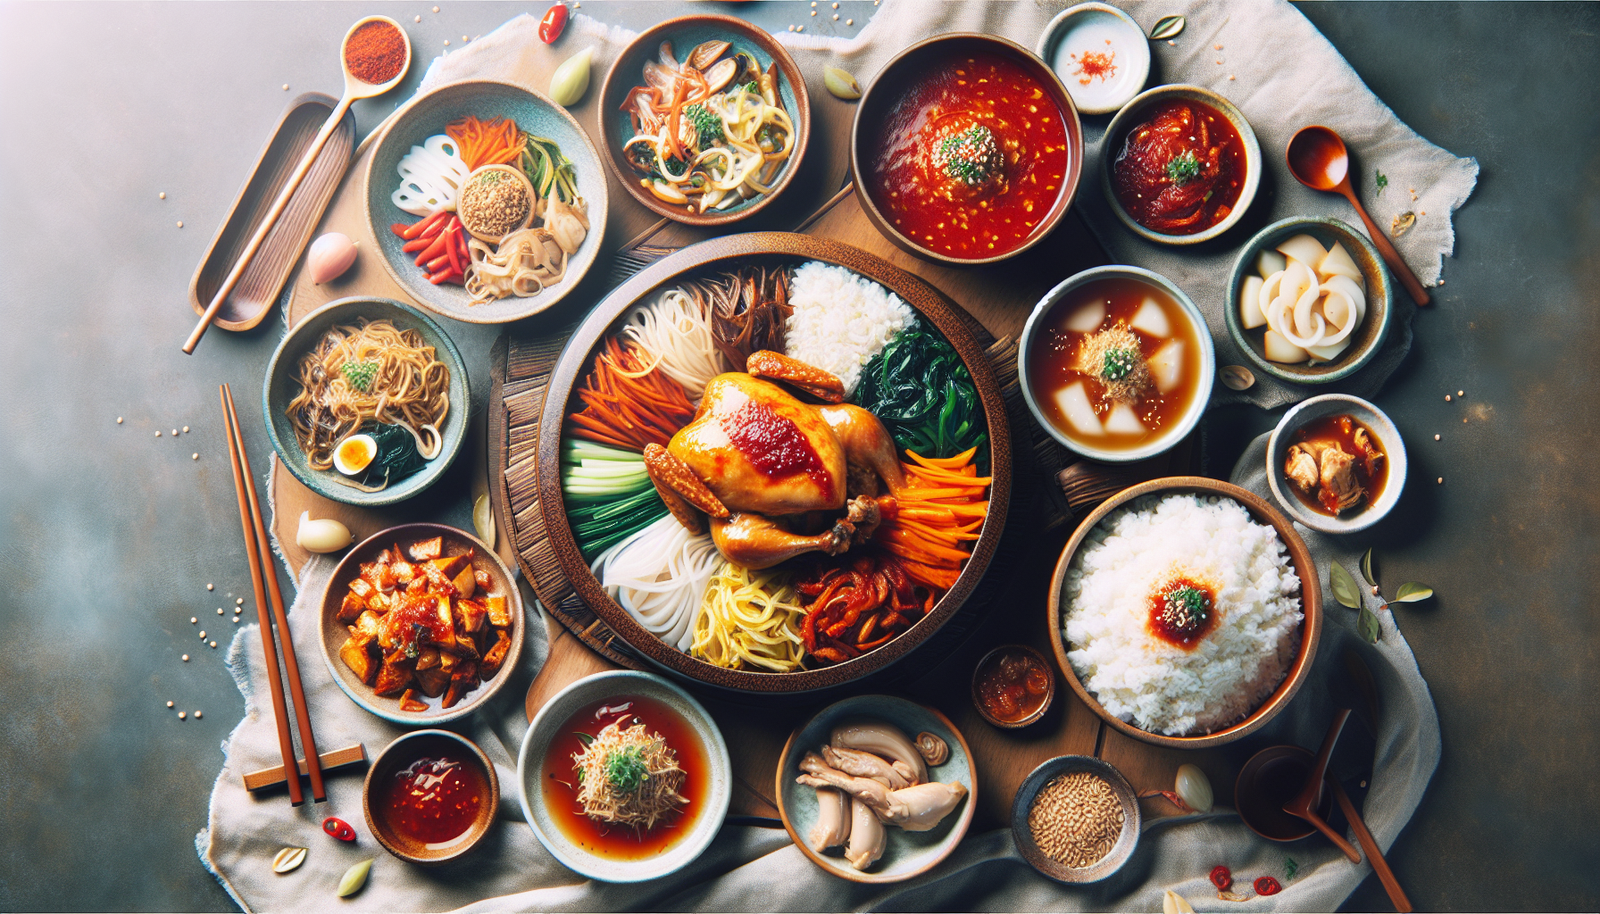 Can You Recommend Traditional Korean Dishes That Are Considered Comfort Food?